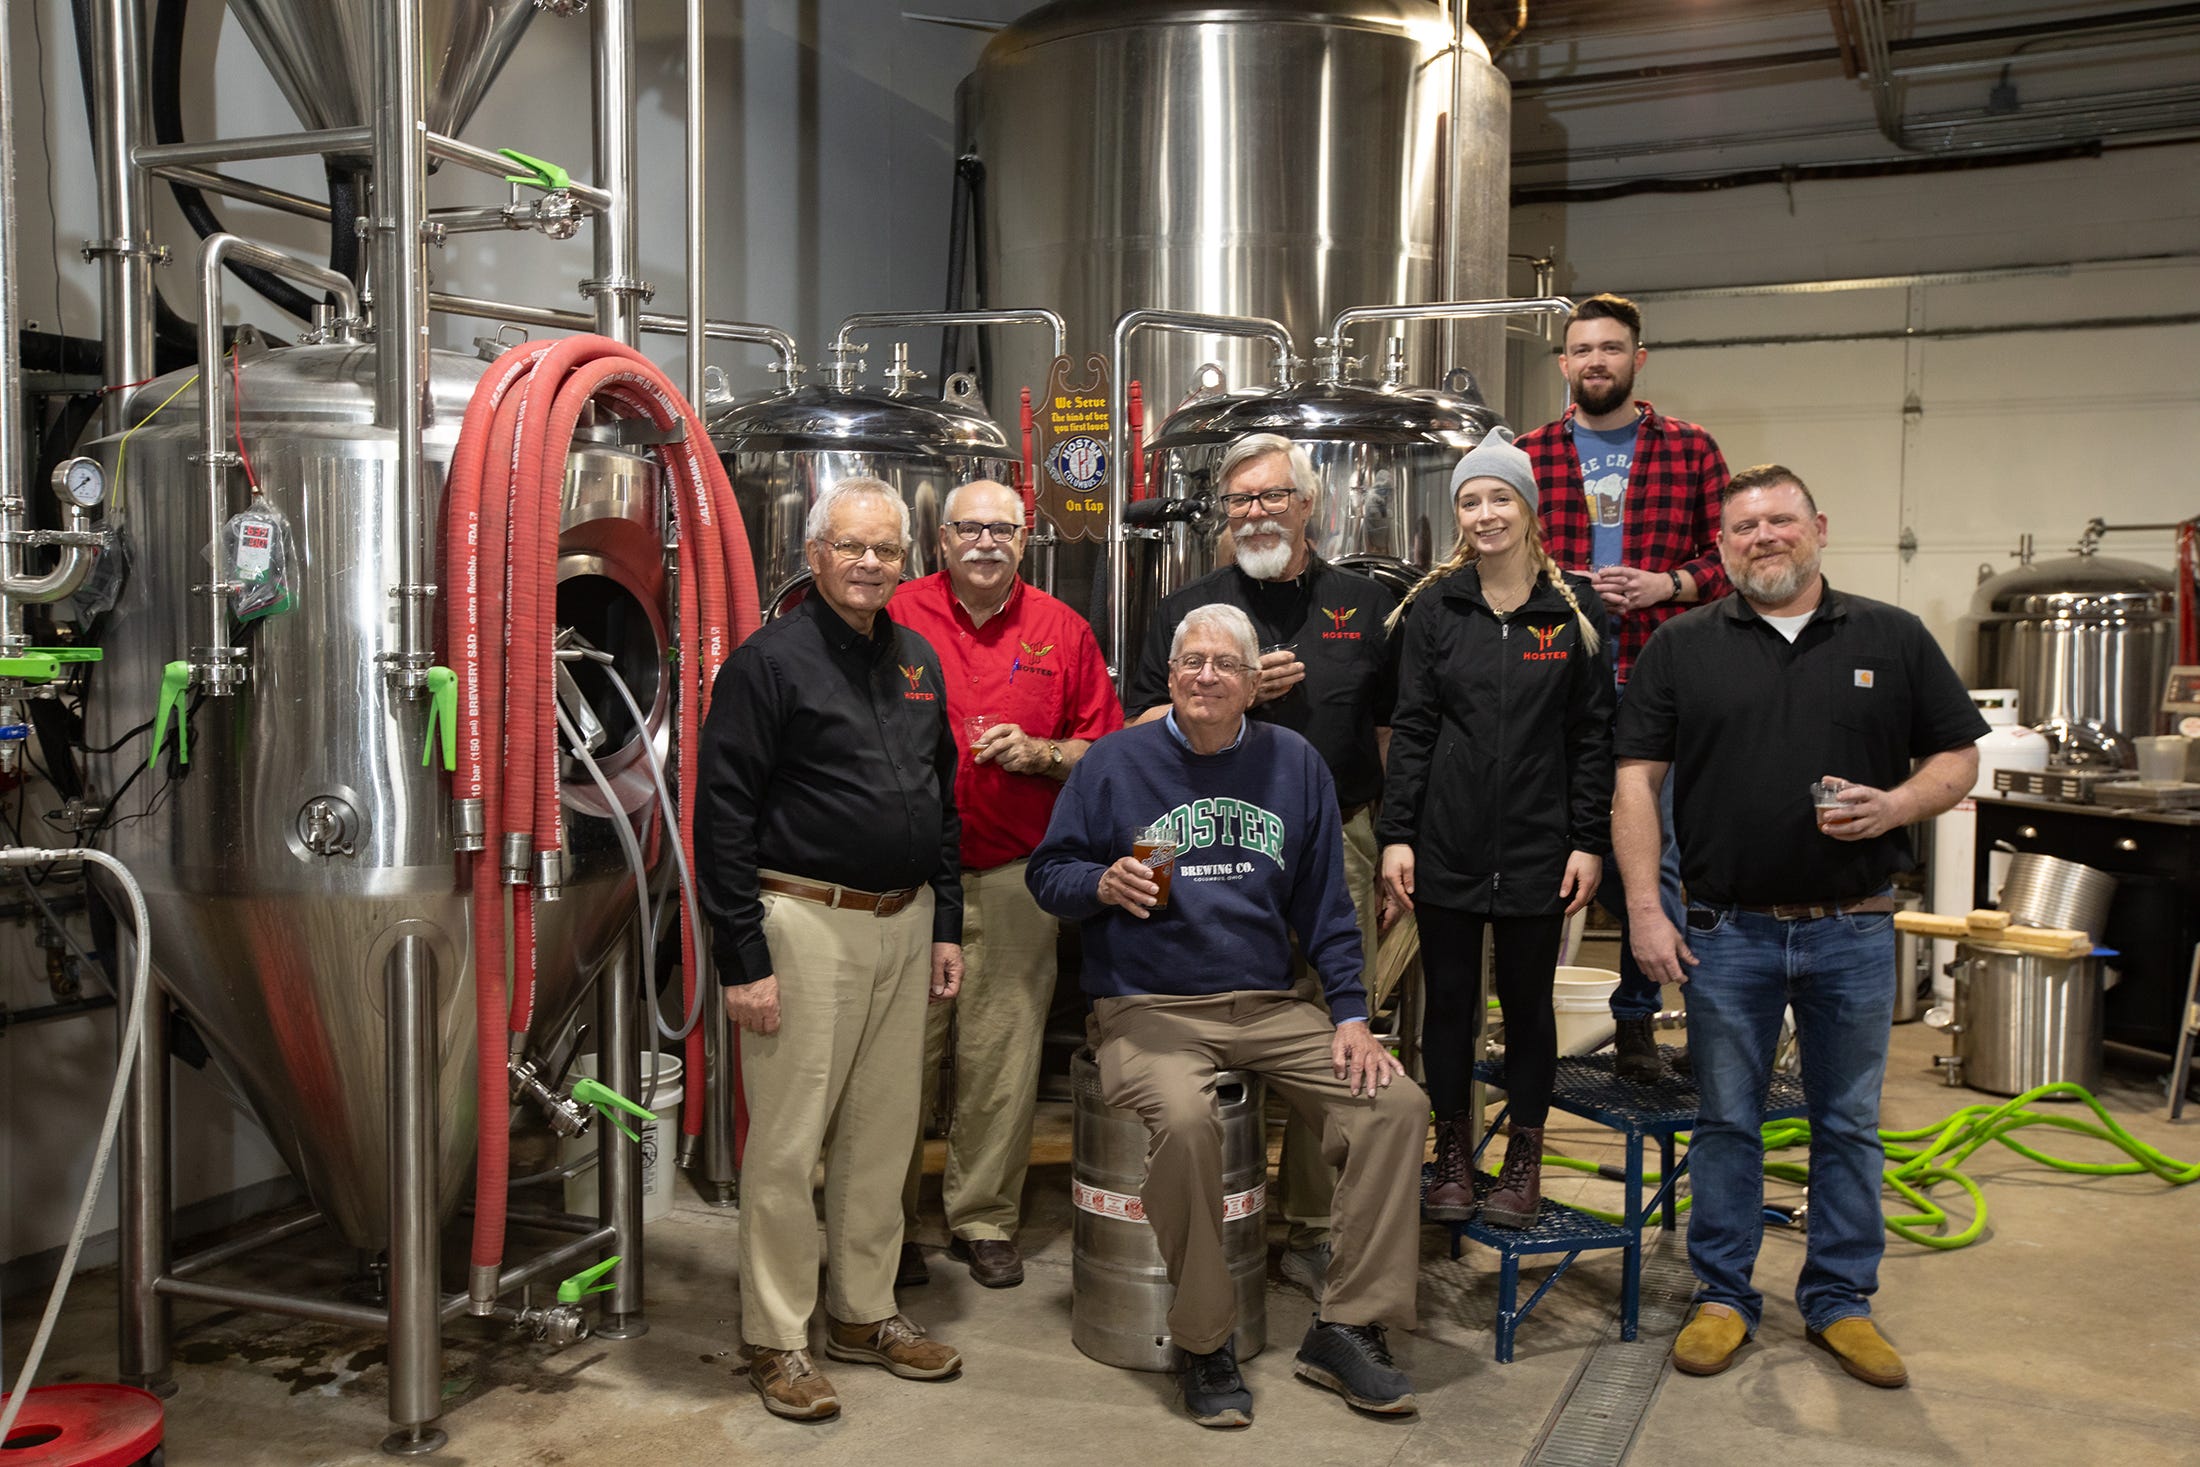 Hoster Brewing Co. is making a comeback with a new brewery and taproom. Pictured in the James Road facility are: Jay Hoster, seated, with (from left) brewer Don Croucher, owner Daniel Meyers, brewmaster Victor Aume, director of yeast management Andrea Grassbaugh, senior brewer Quinn Bartlett and operations manager Brad Schweitzer.